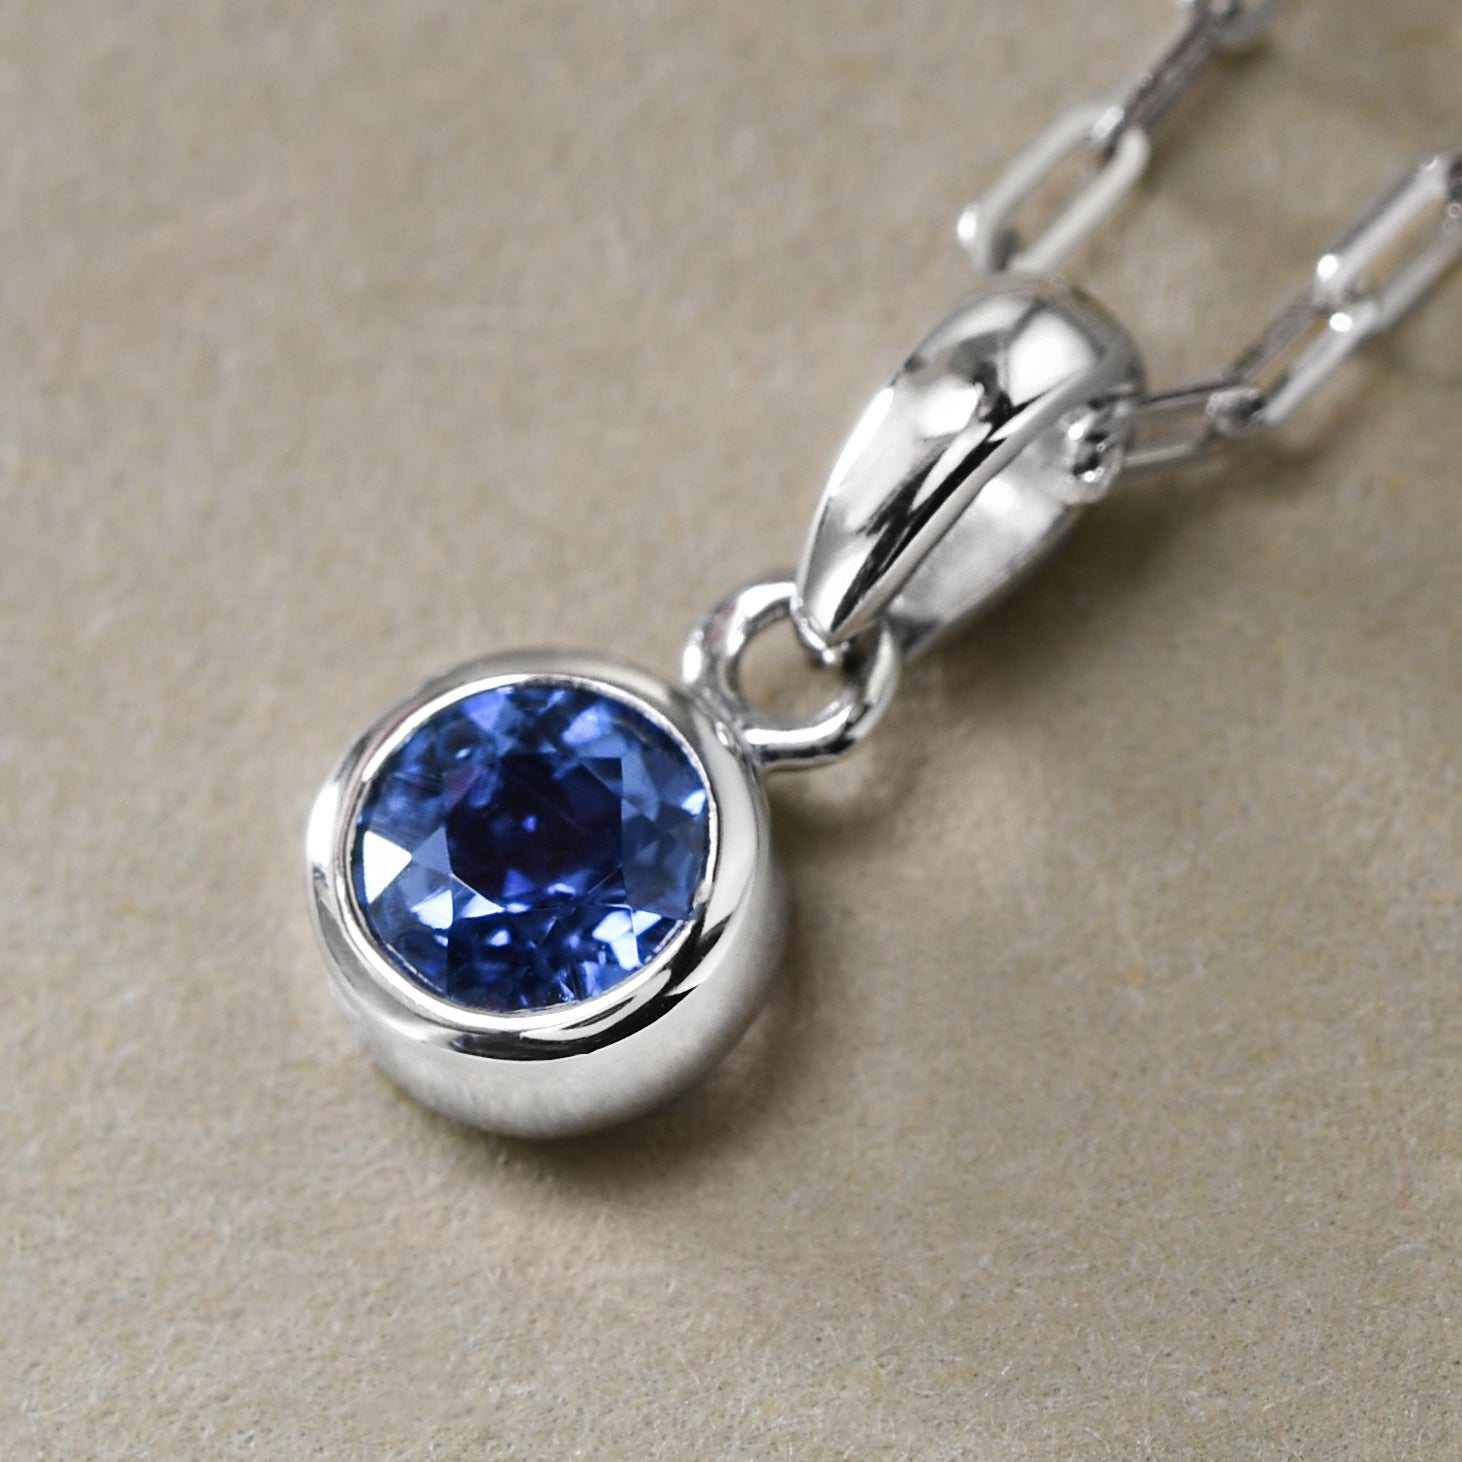 Necklaces and Pendants - Diamond / Gold / Gemstone Necklaces at Plante  Jewelers